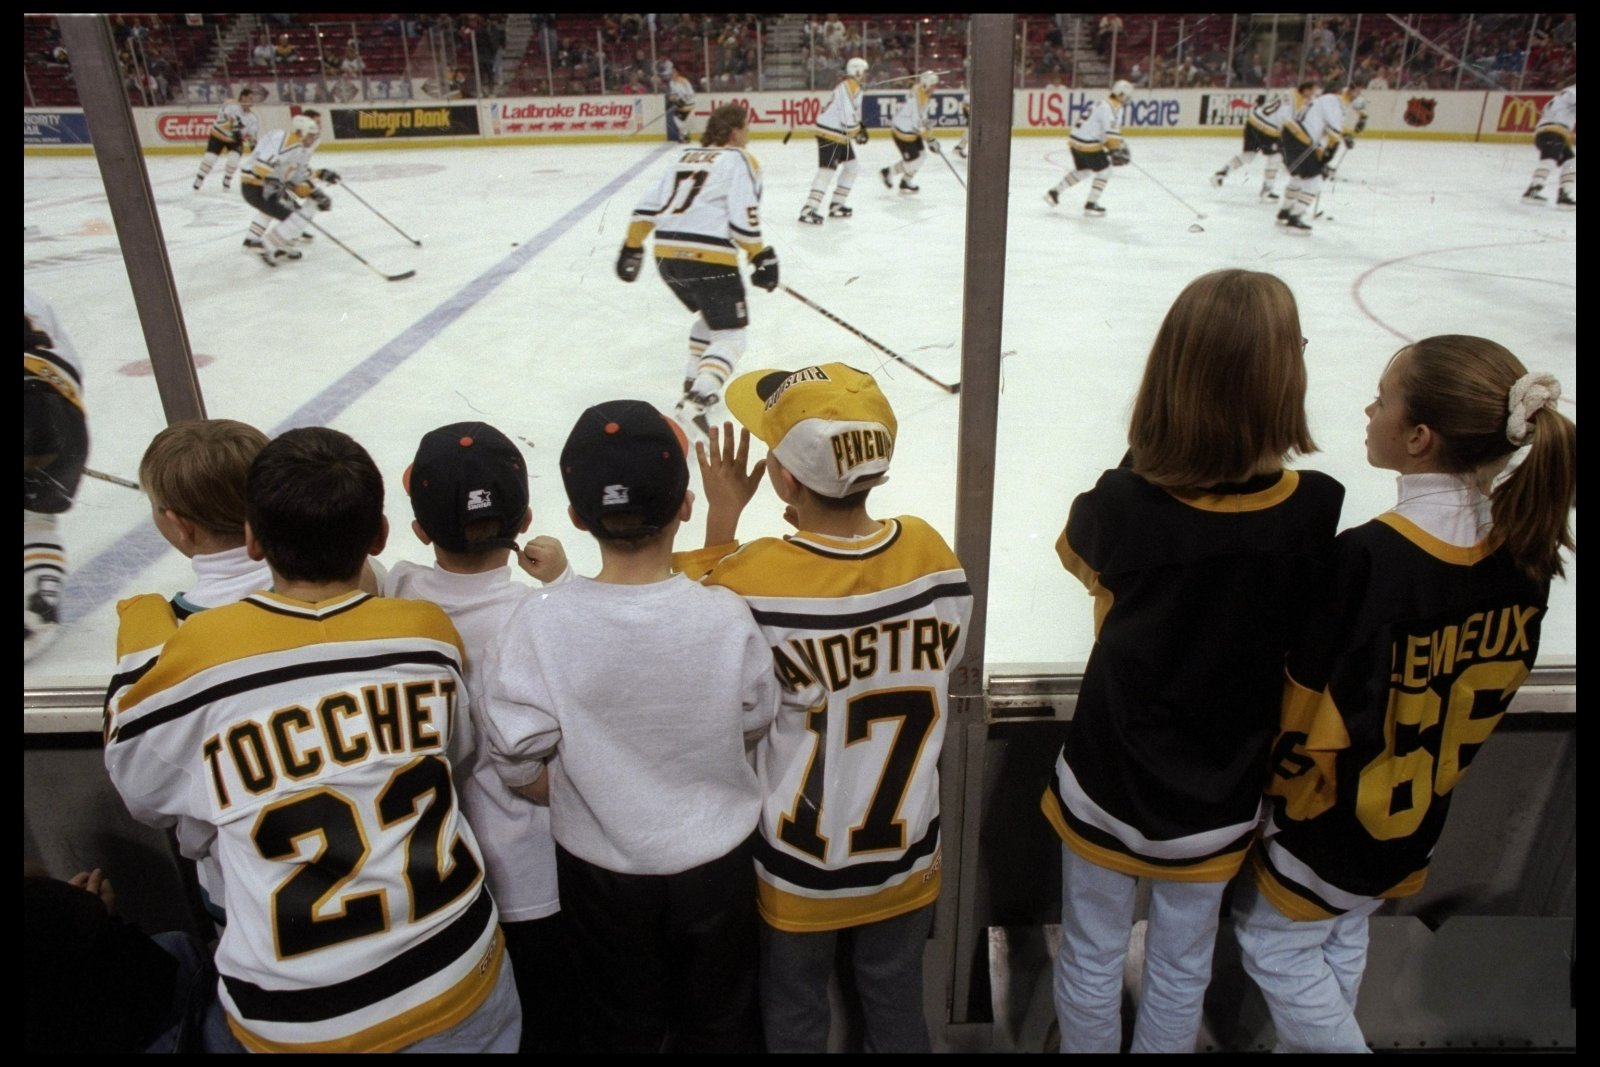 The path that led me to becoming a Pittsburgh Penguins fan